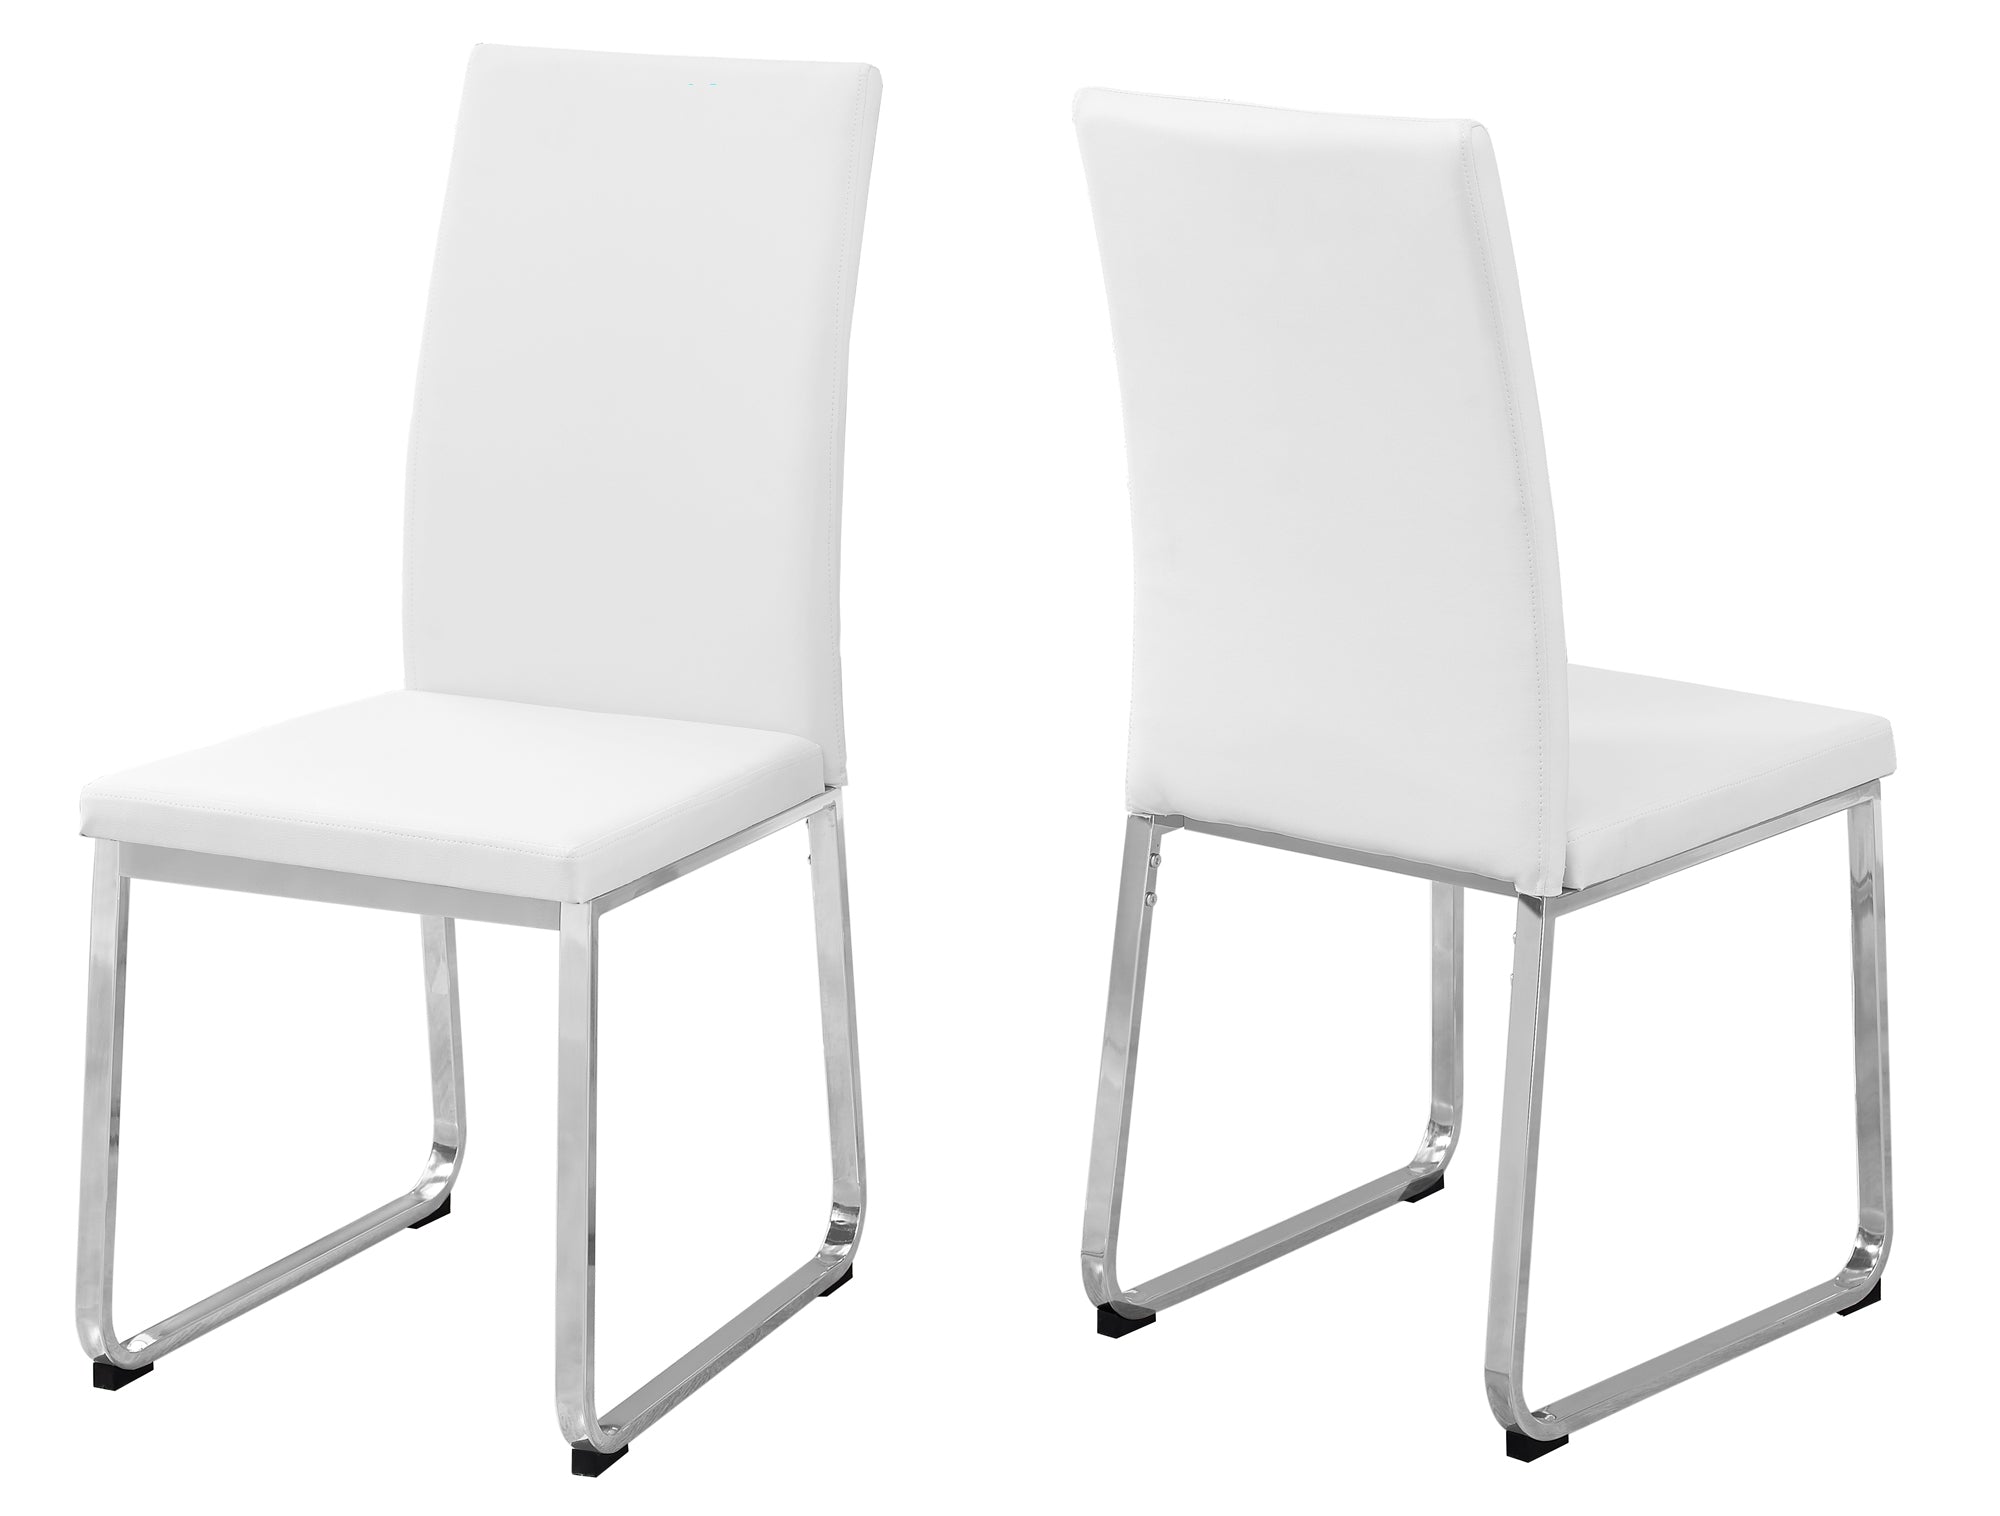 Mclenagan Modern Dining Chair With Chrome Finish Legs (Set of 2 - White)